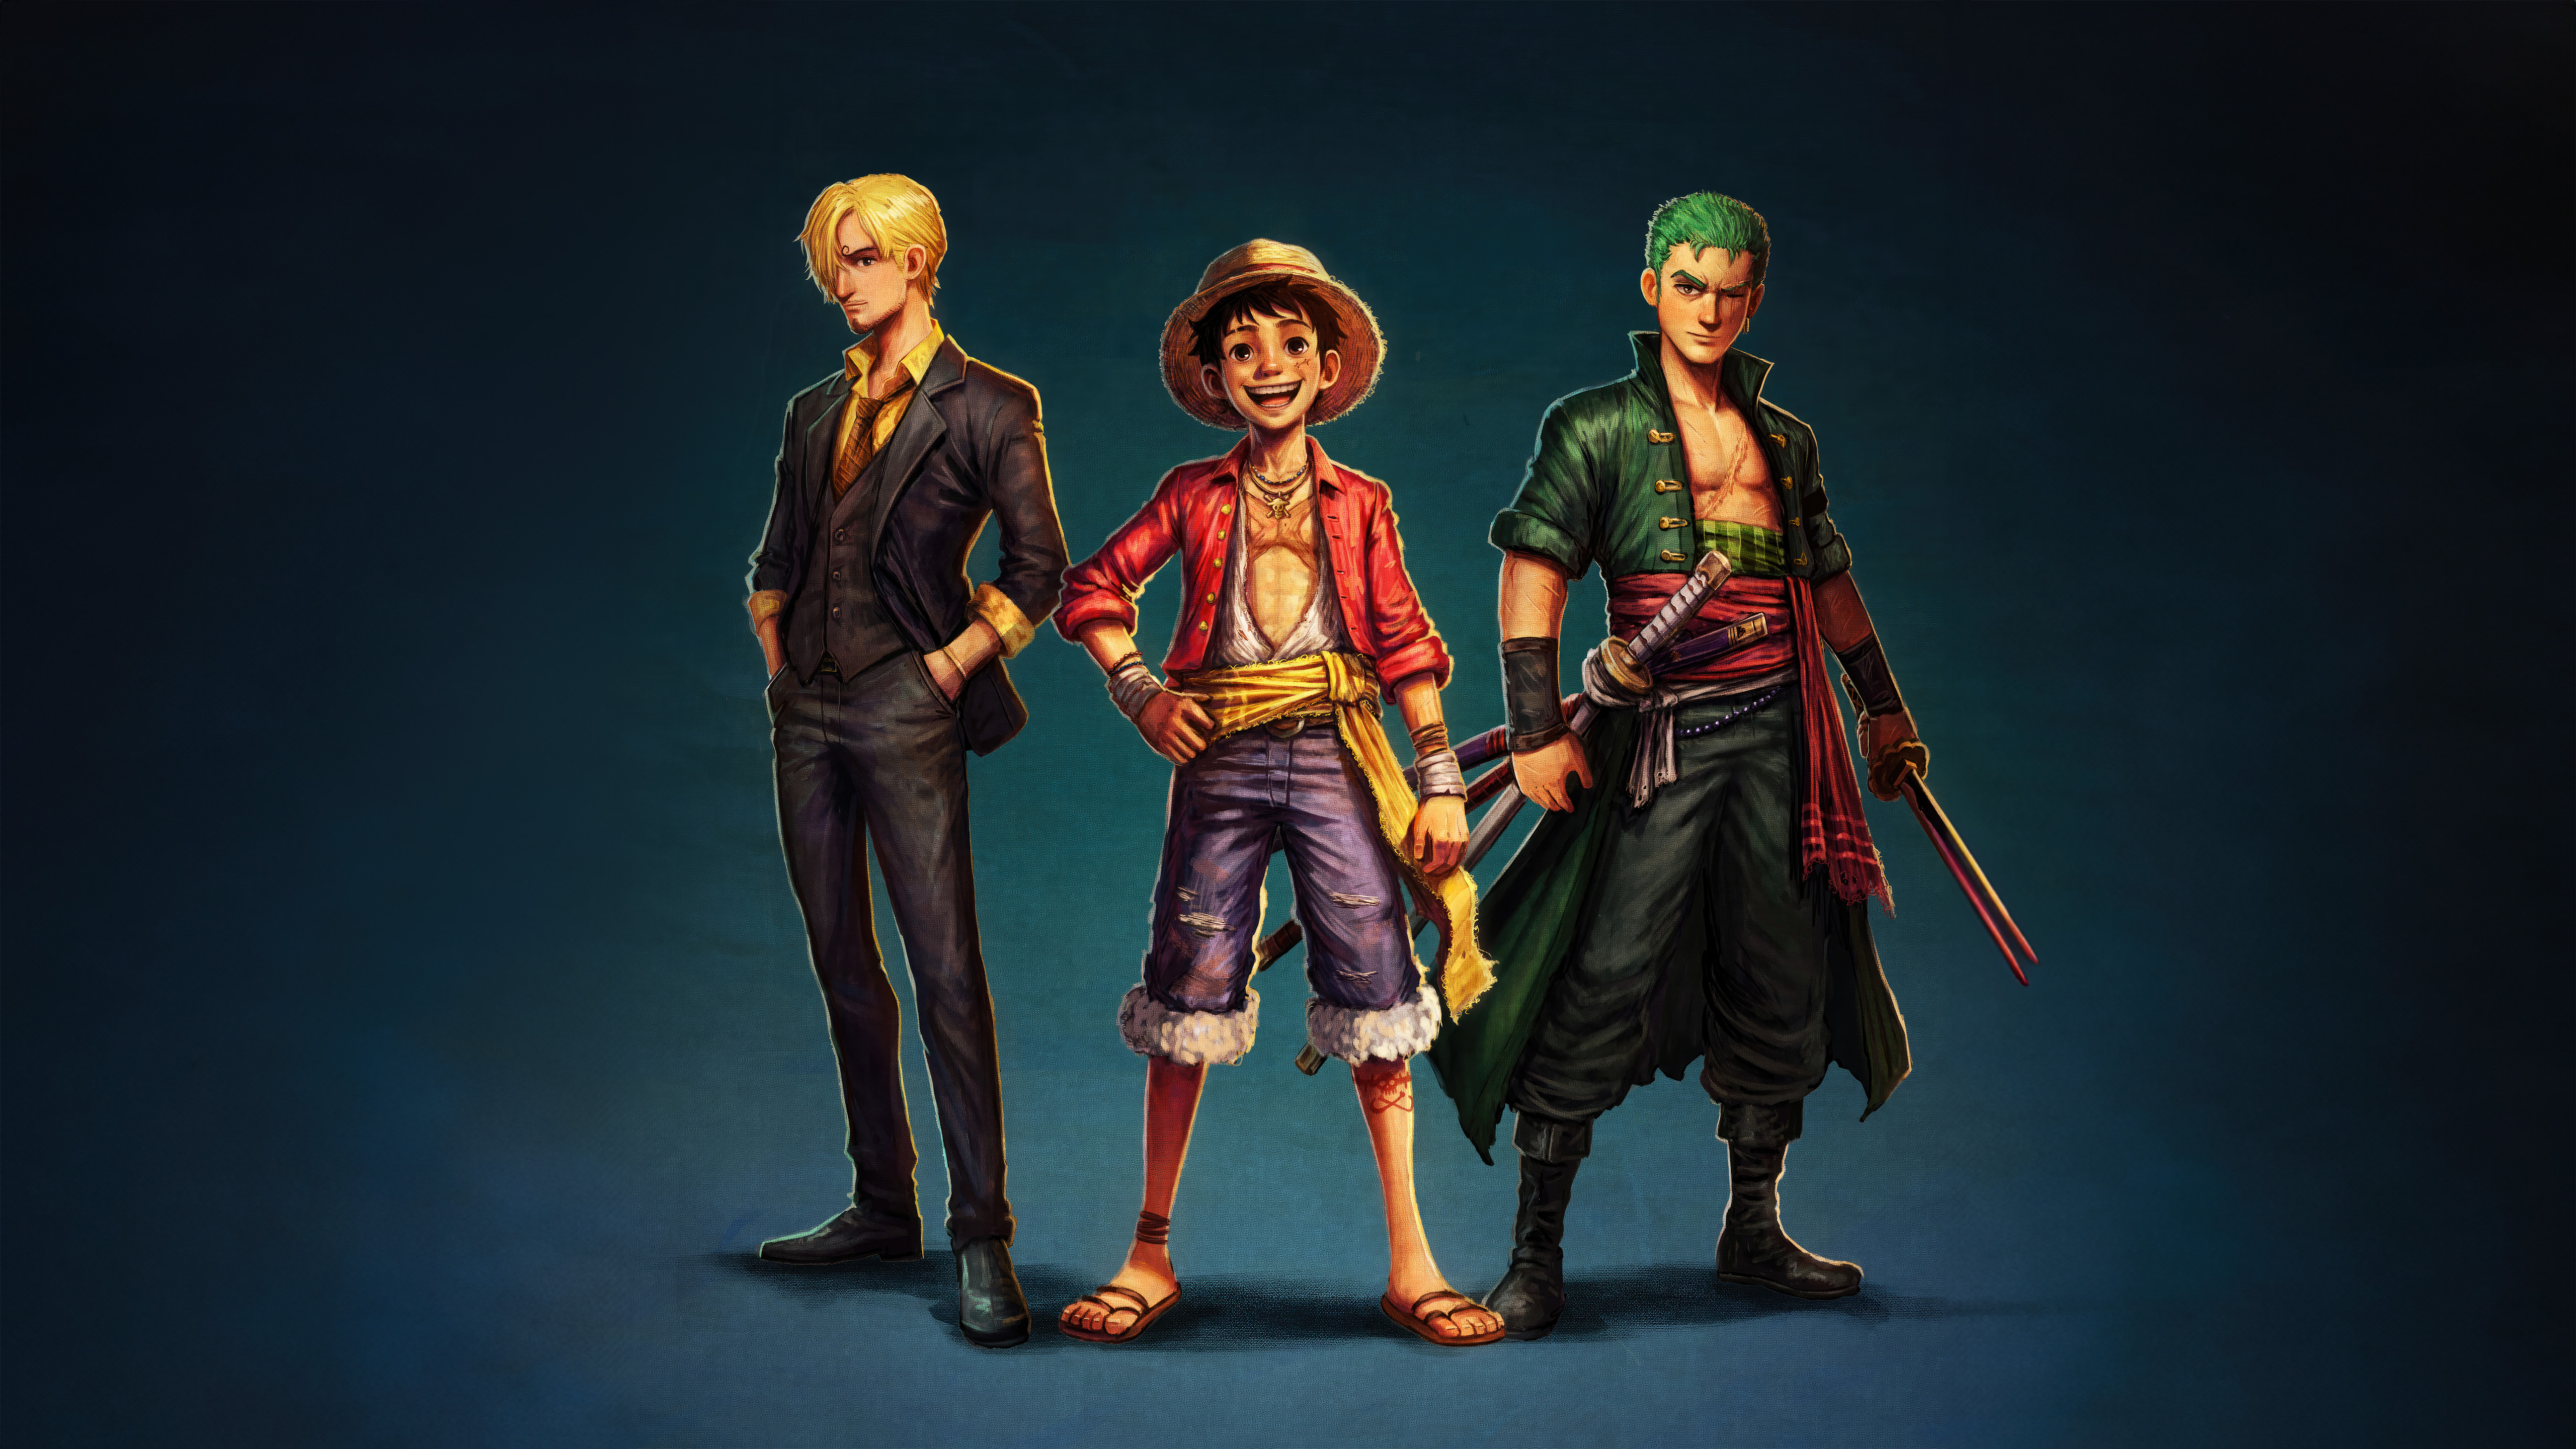 Monkey D Luffy Zoro And Sanji One Piece Wallpaper,HD Tv Shows Wallpapers,4k  Wallpapers,Images,Backgrounds,Photos and Pictures